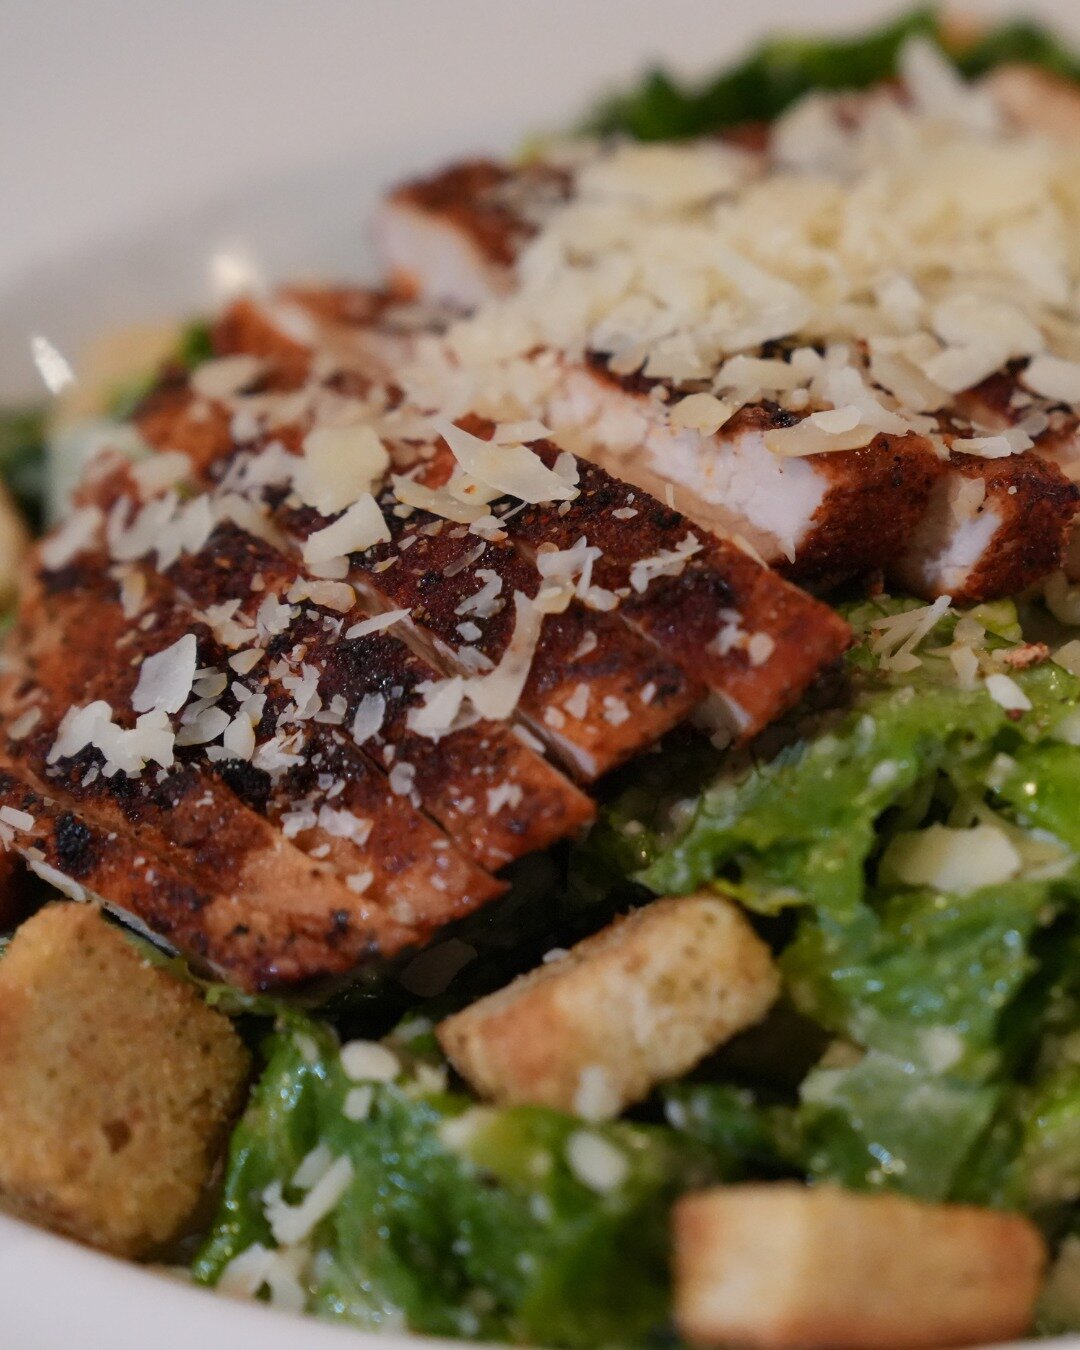 With pan-fried prosciutto, freshly grated parm, and a creamy house-made dressing, our new Blackened Chicken Caesar Salad is a feast for the eyes and the palette! Come give it a try yourself - doors open at 4 for Dinner and Happy Hour 🥂

#reddingca #